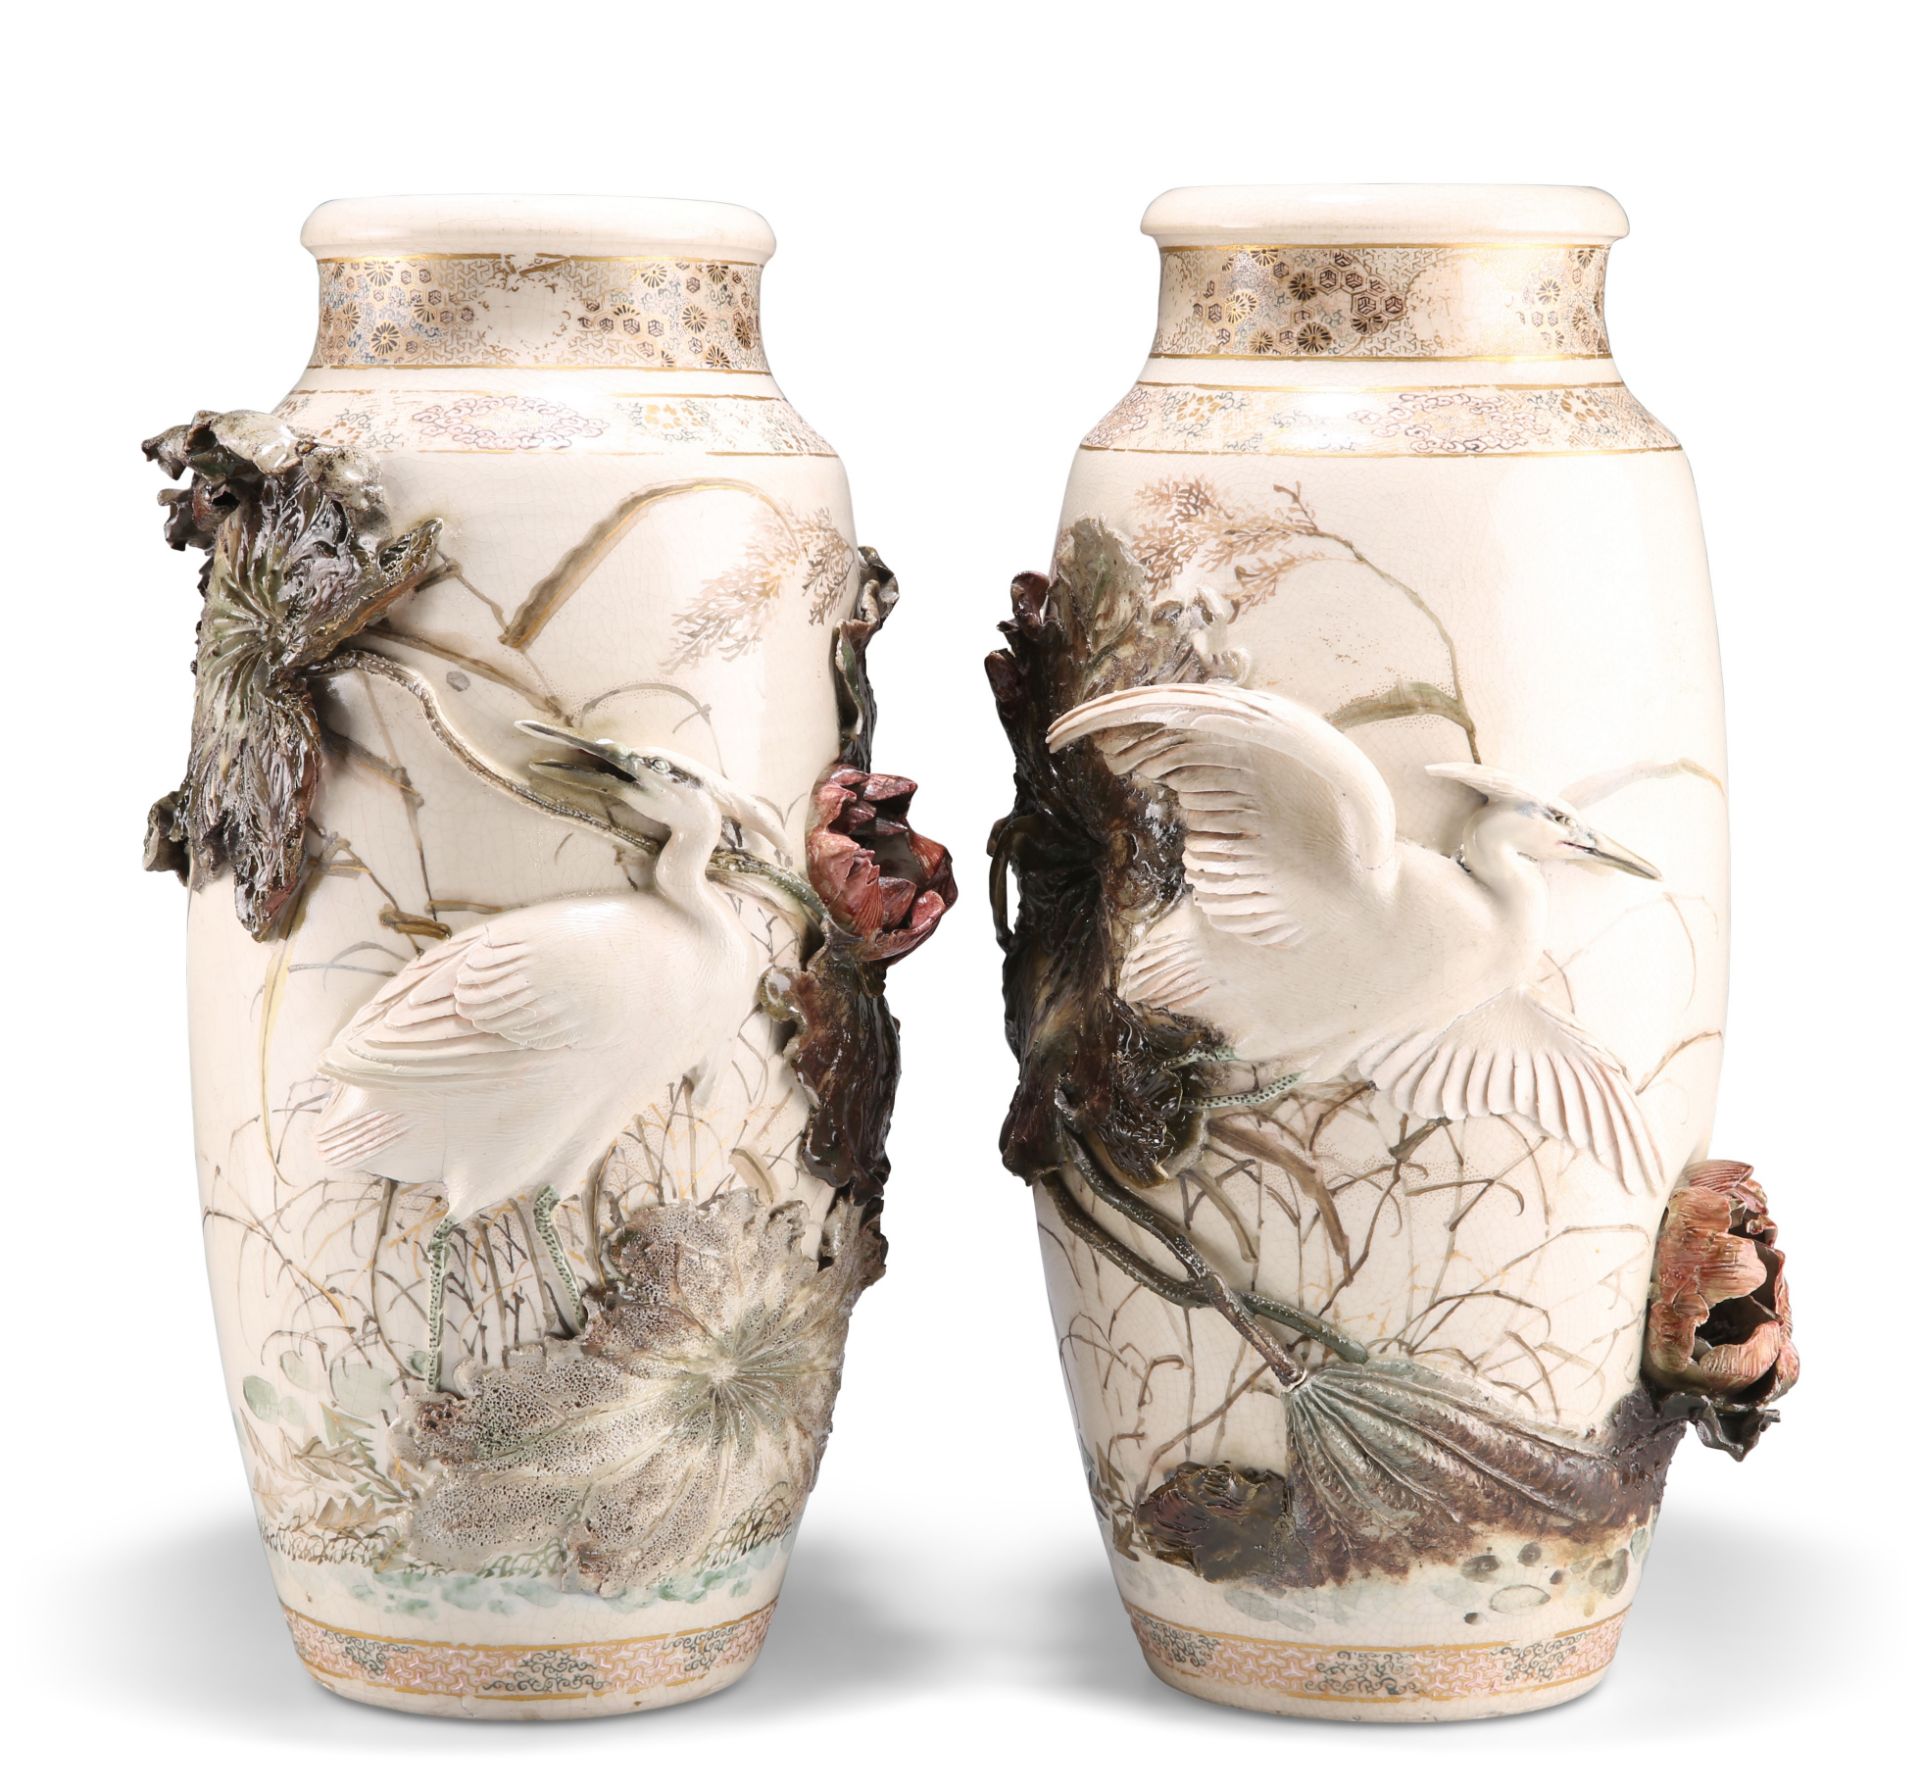 A LARGE PAIR OF JAPANESE SATSUMA VASES WITH APPLIQUÉ DECORATION